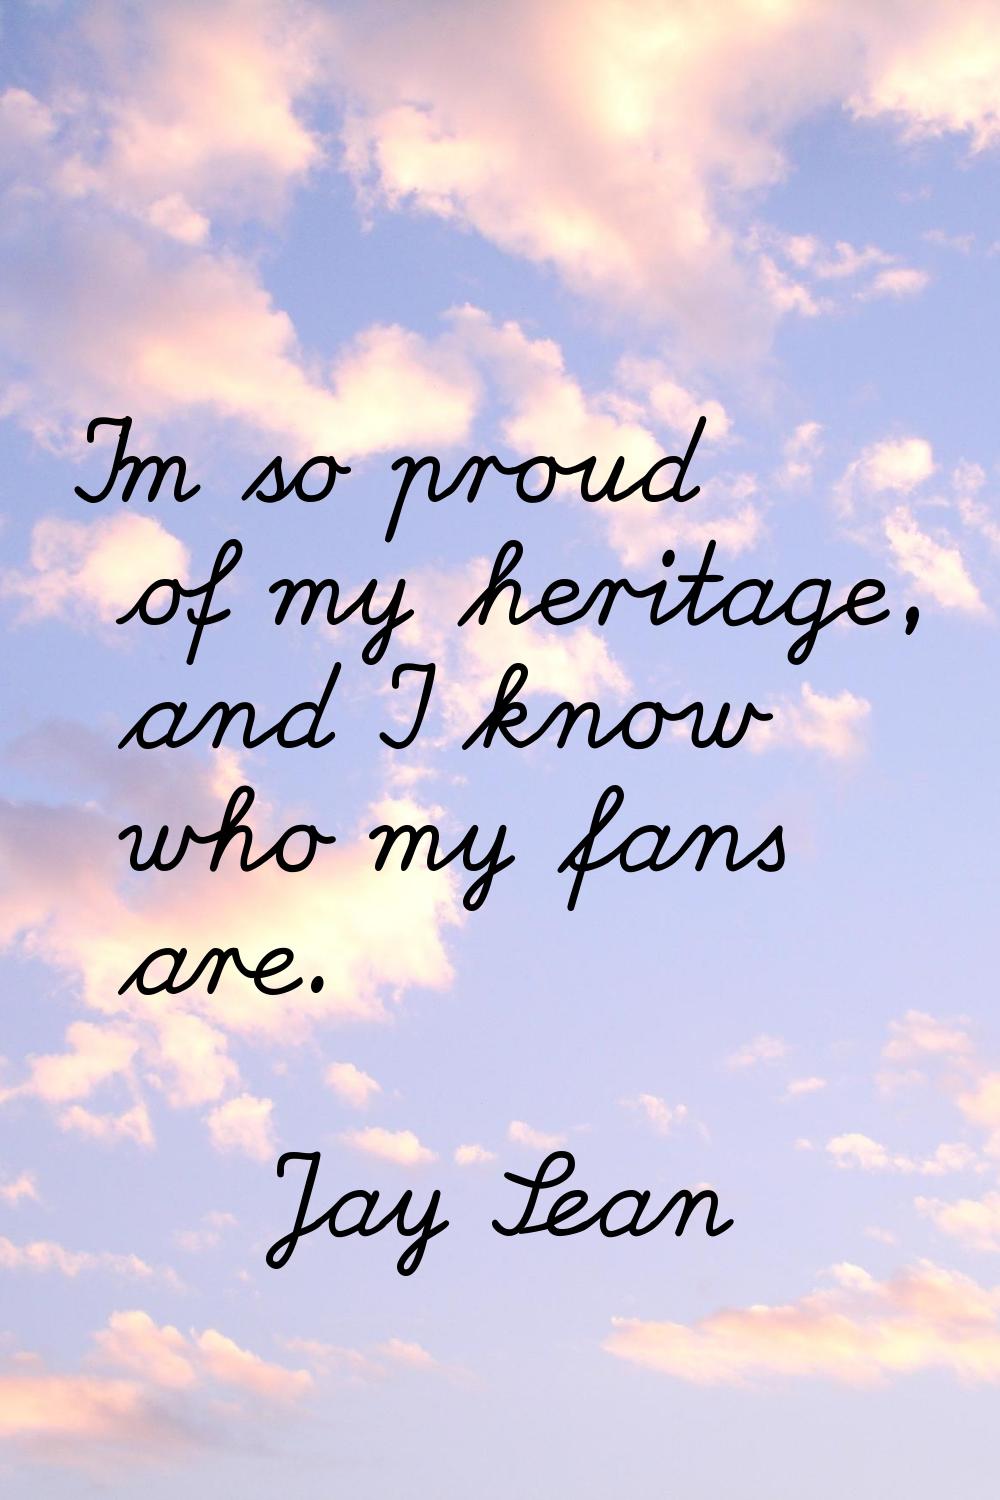 I'm so proud of my heritage, and I know who my fans are.